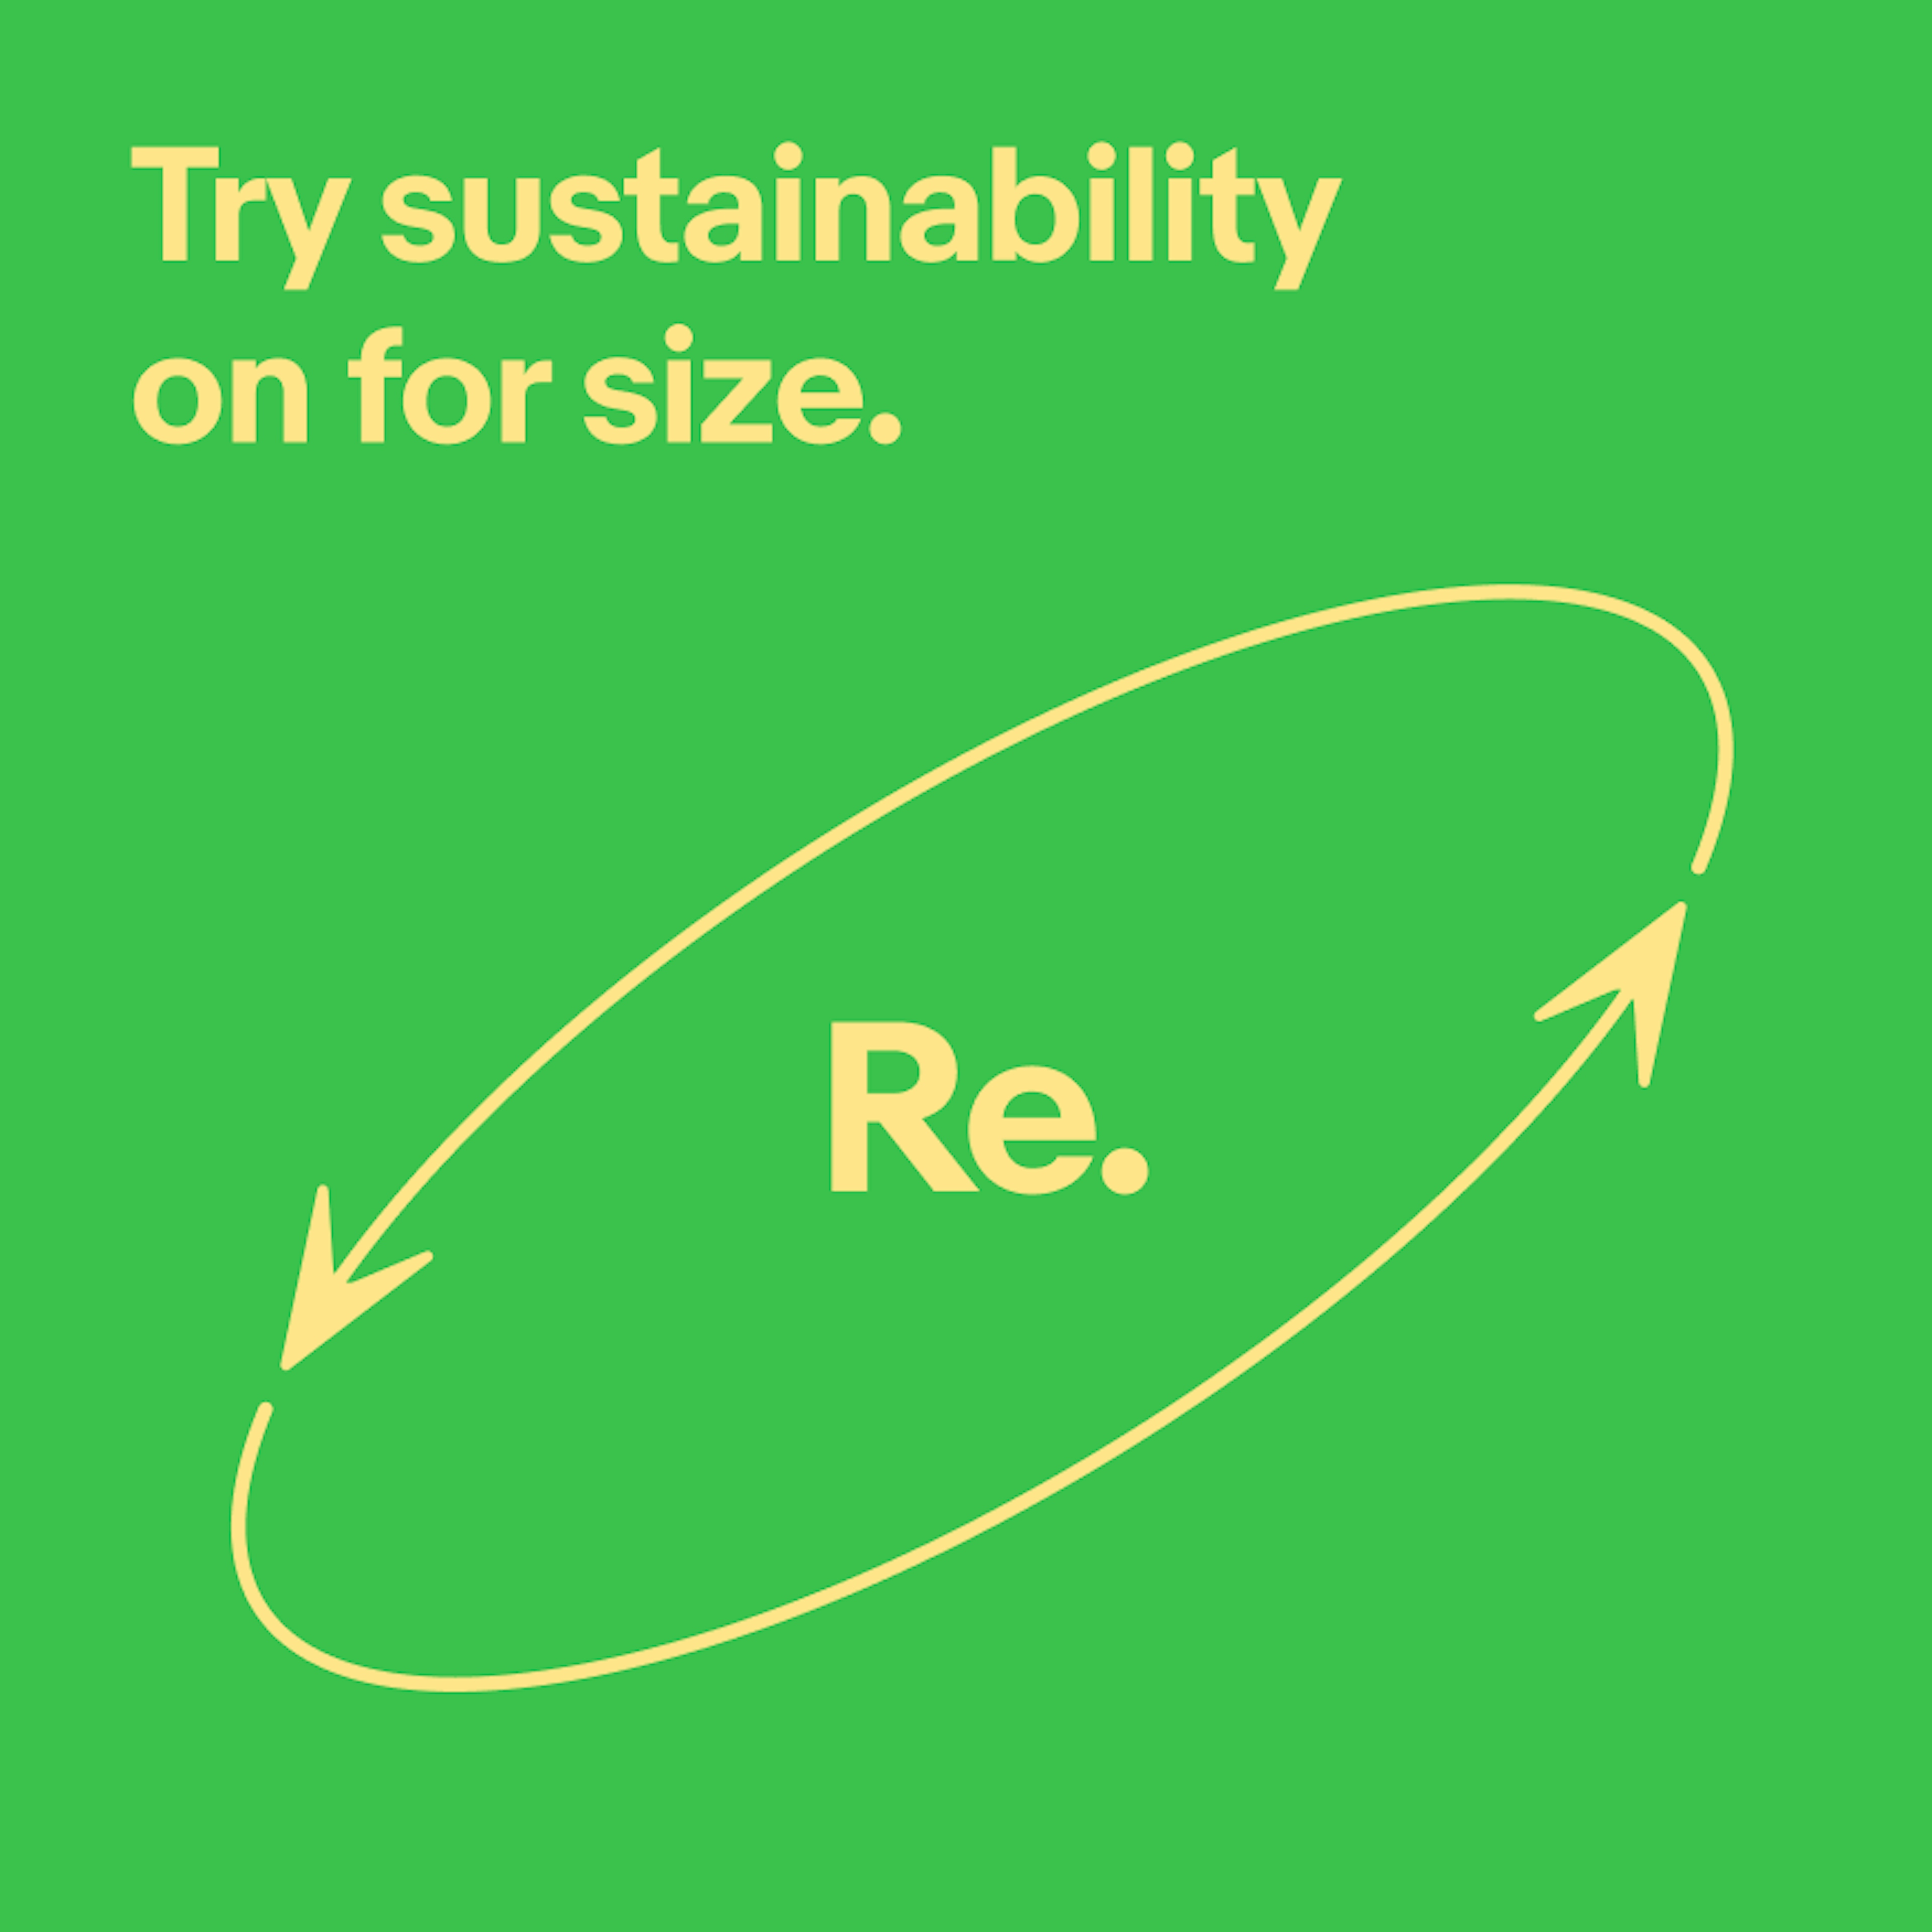 A sustainability graphic with text and arrows. The foreground color is a light yellow, while the background color is a light green.